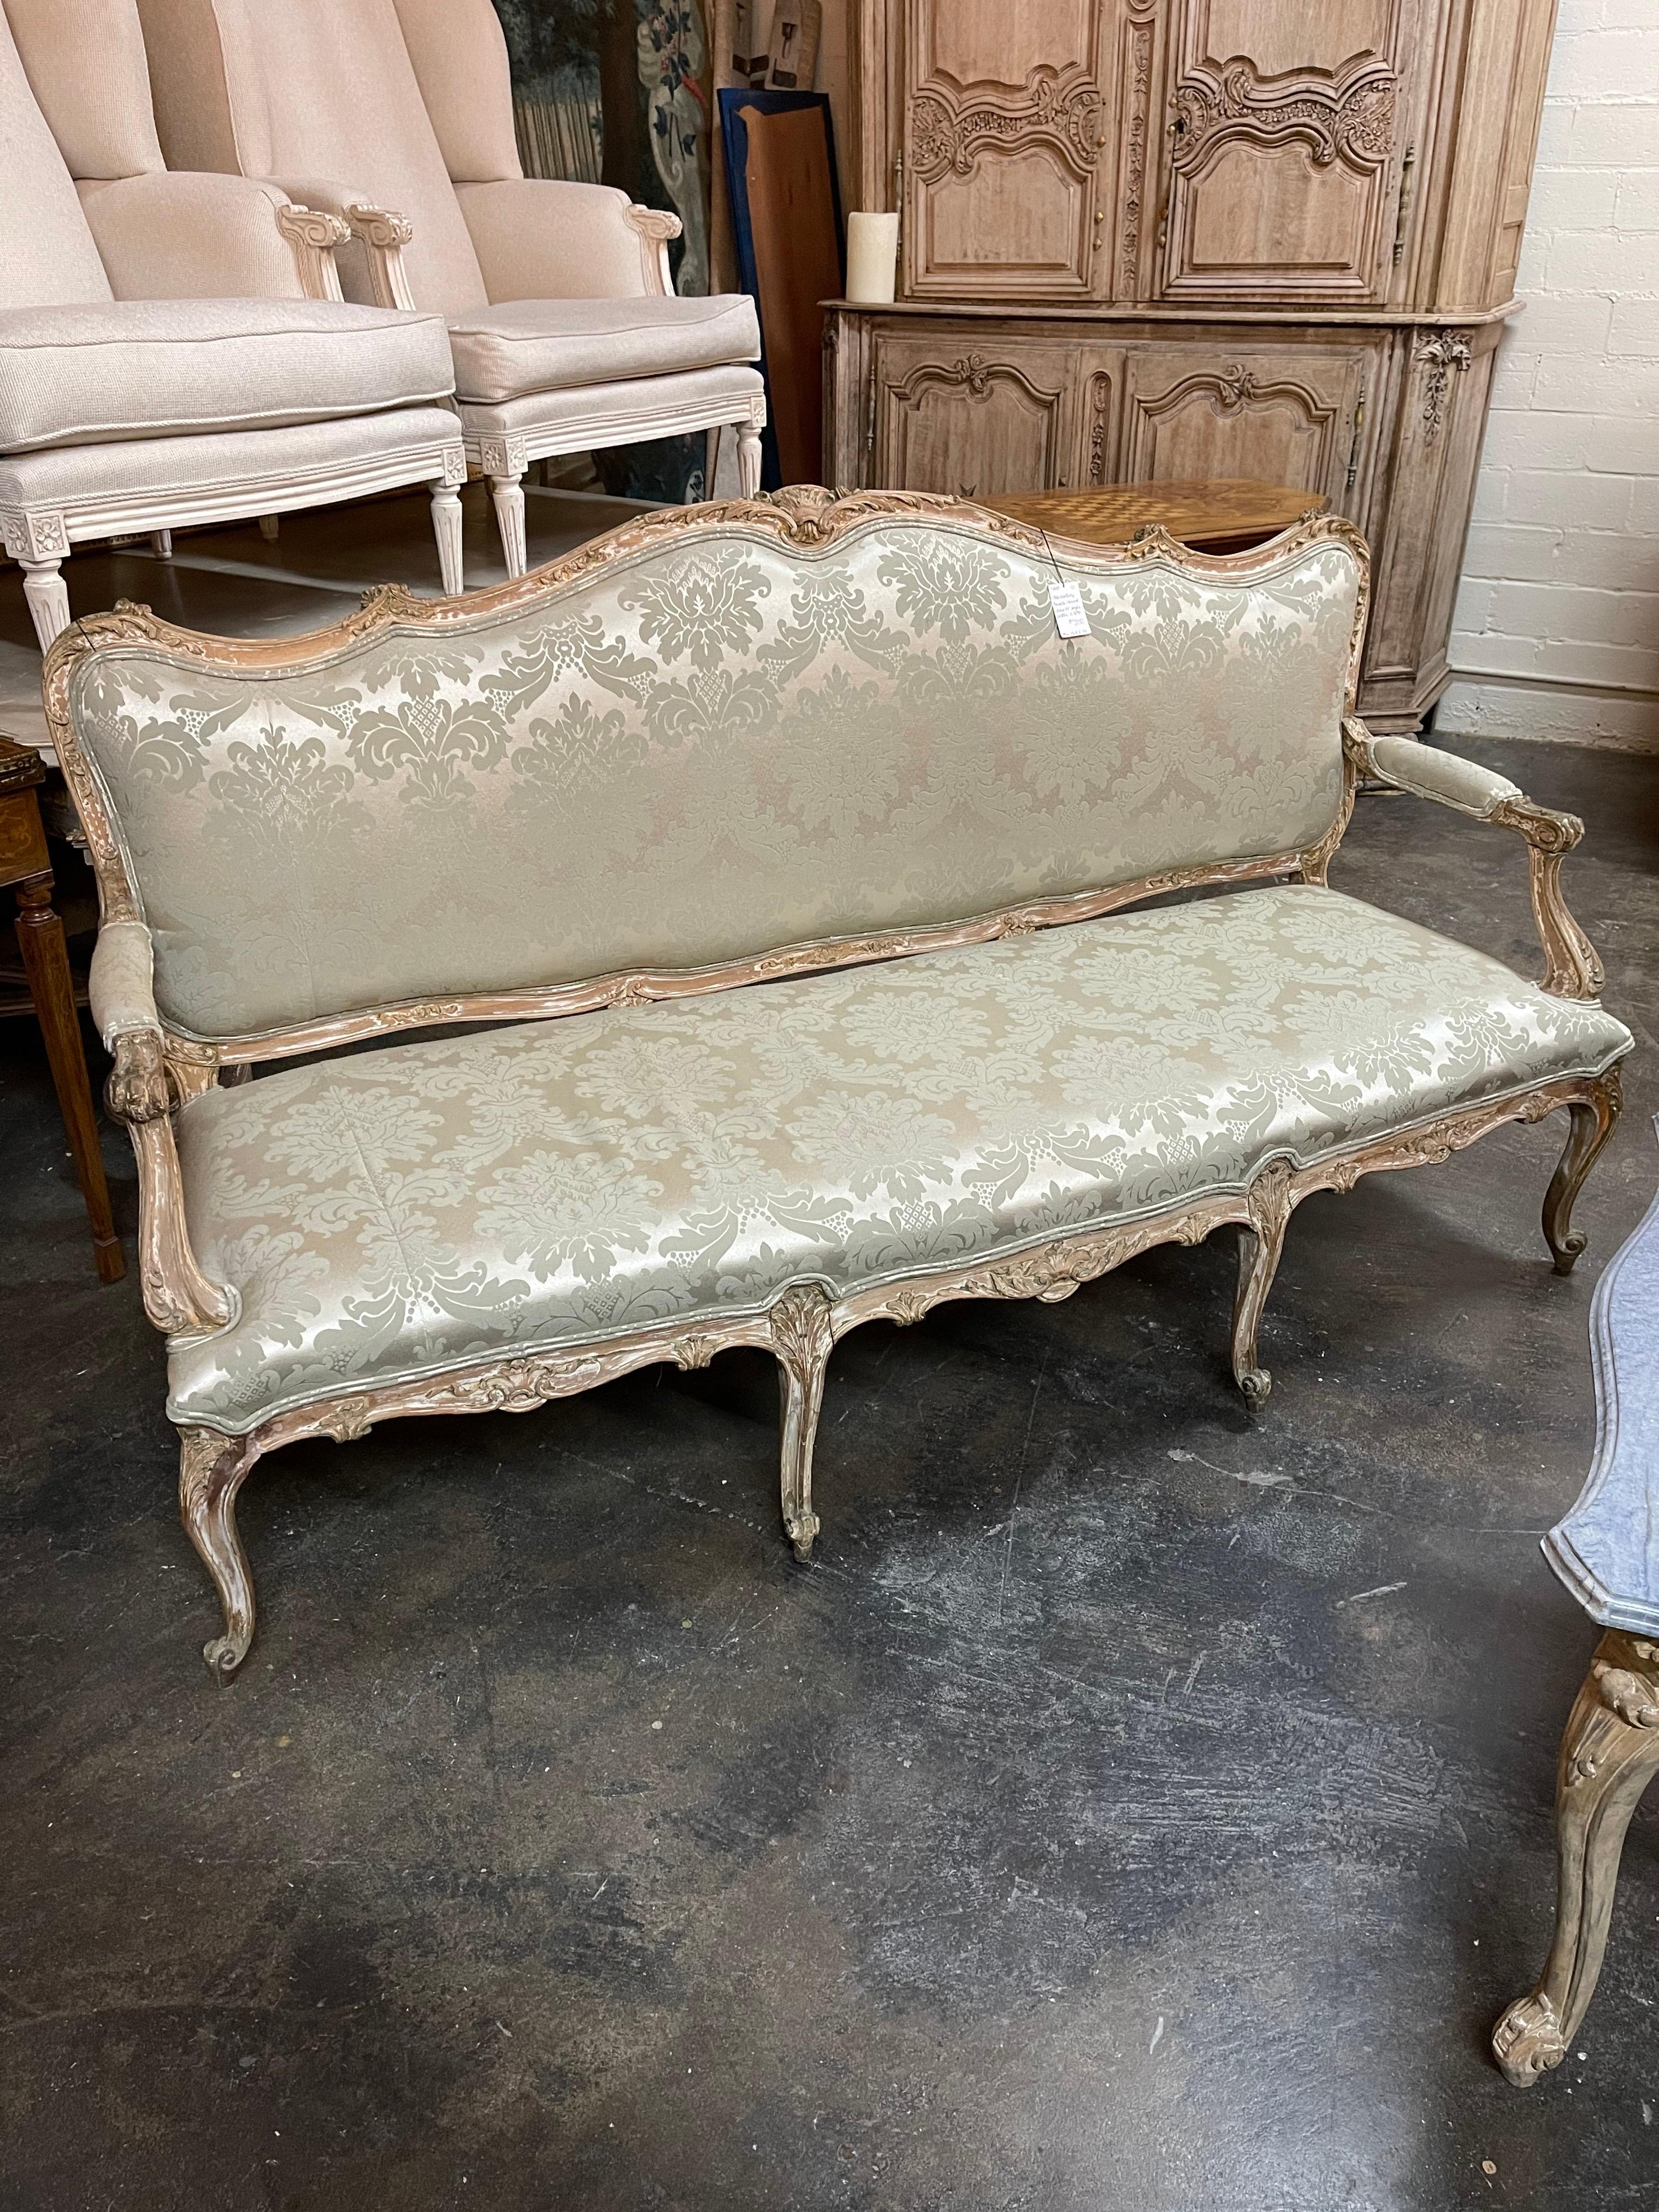 Fine quality and very elegant 19th century French Louis XV style settee or sofa with a shaped crest and skirt. Expertly hand-carved overall with shells and acanthus leaves. Upholstered in a superb damask fabric. The entire on graceful cabriole legs